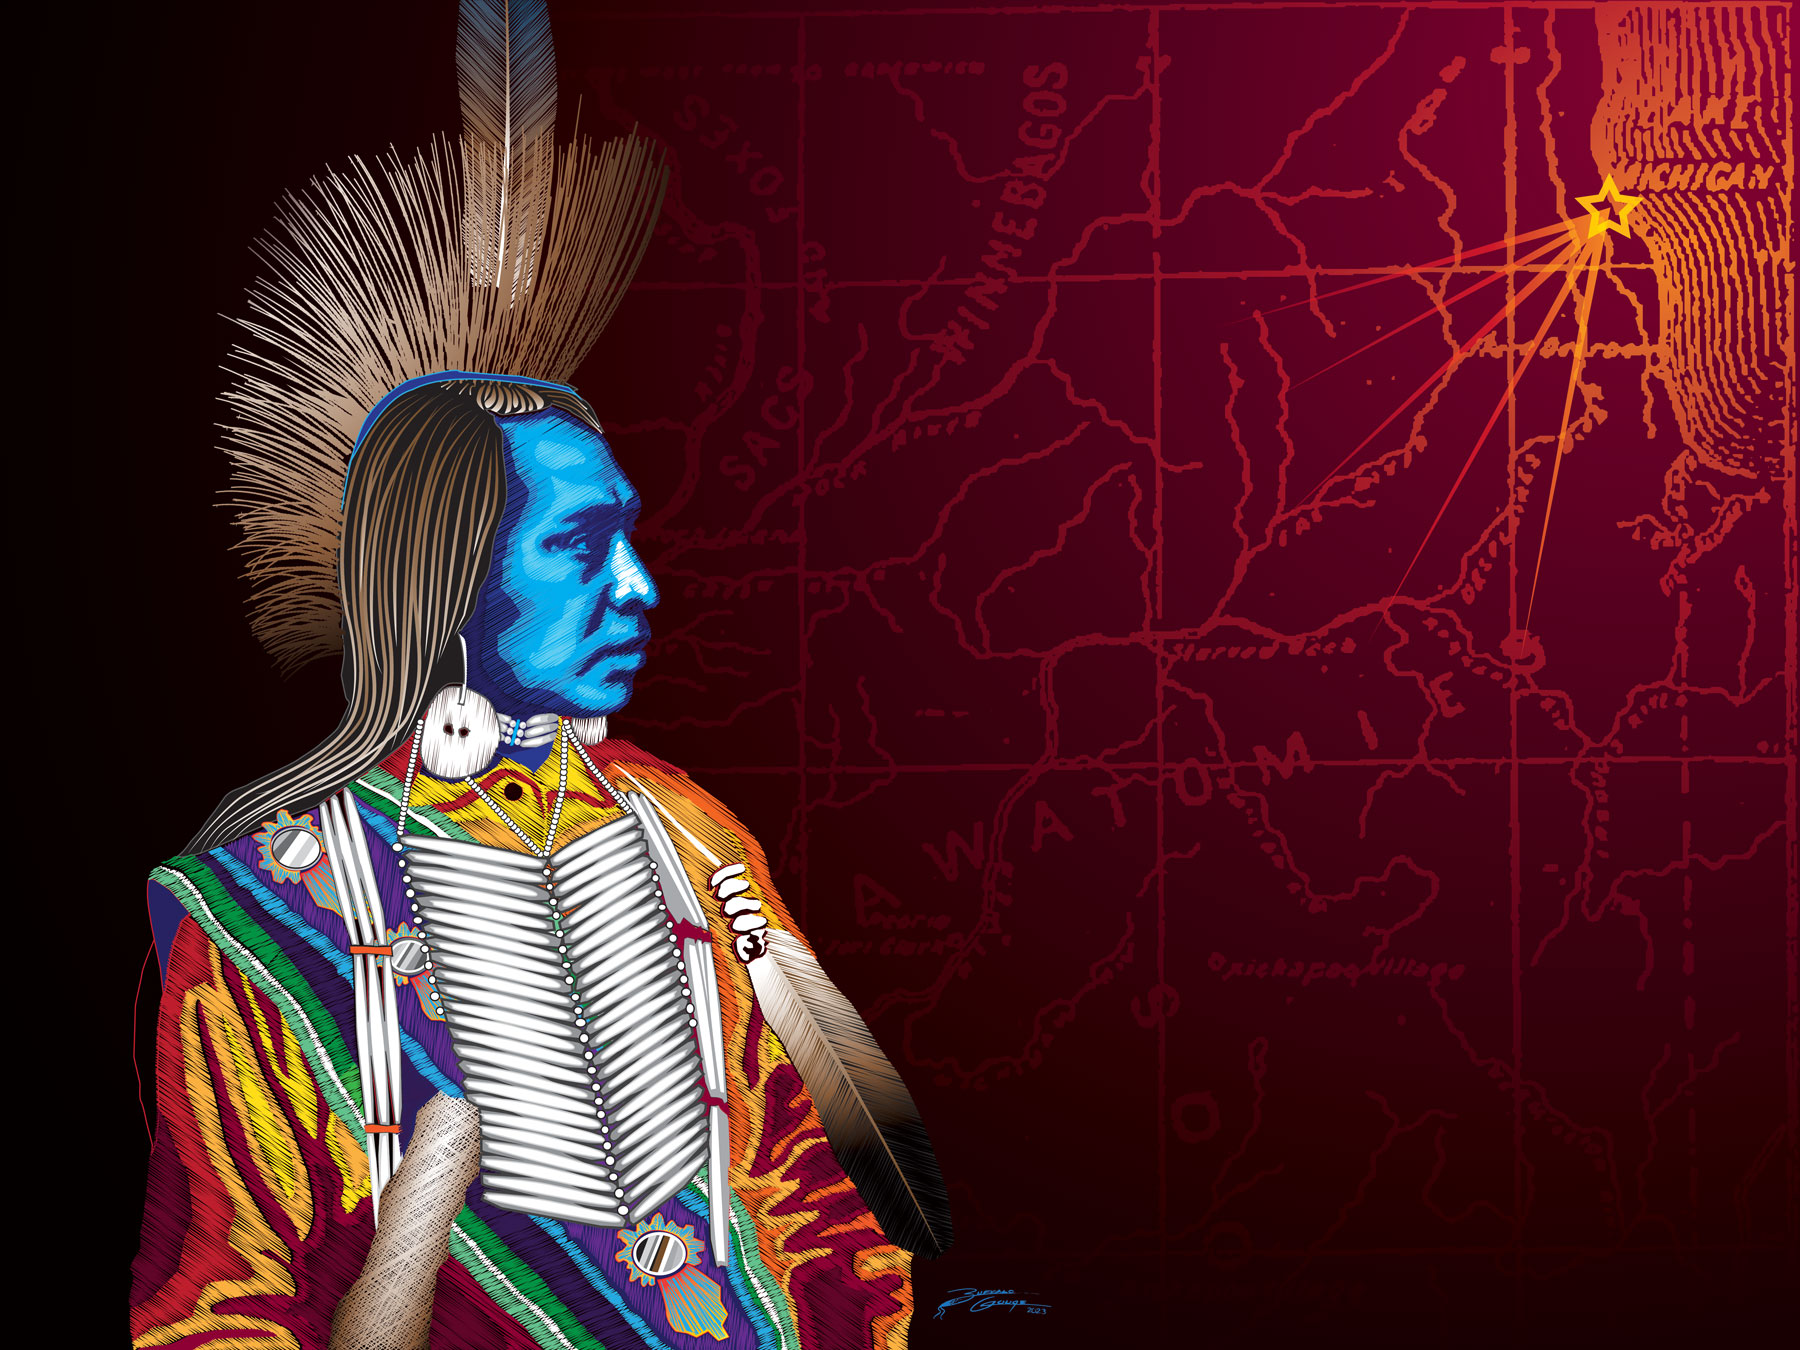 Expressive artwork of a Native American, side profile, by artist Buffalo Gouge